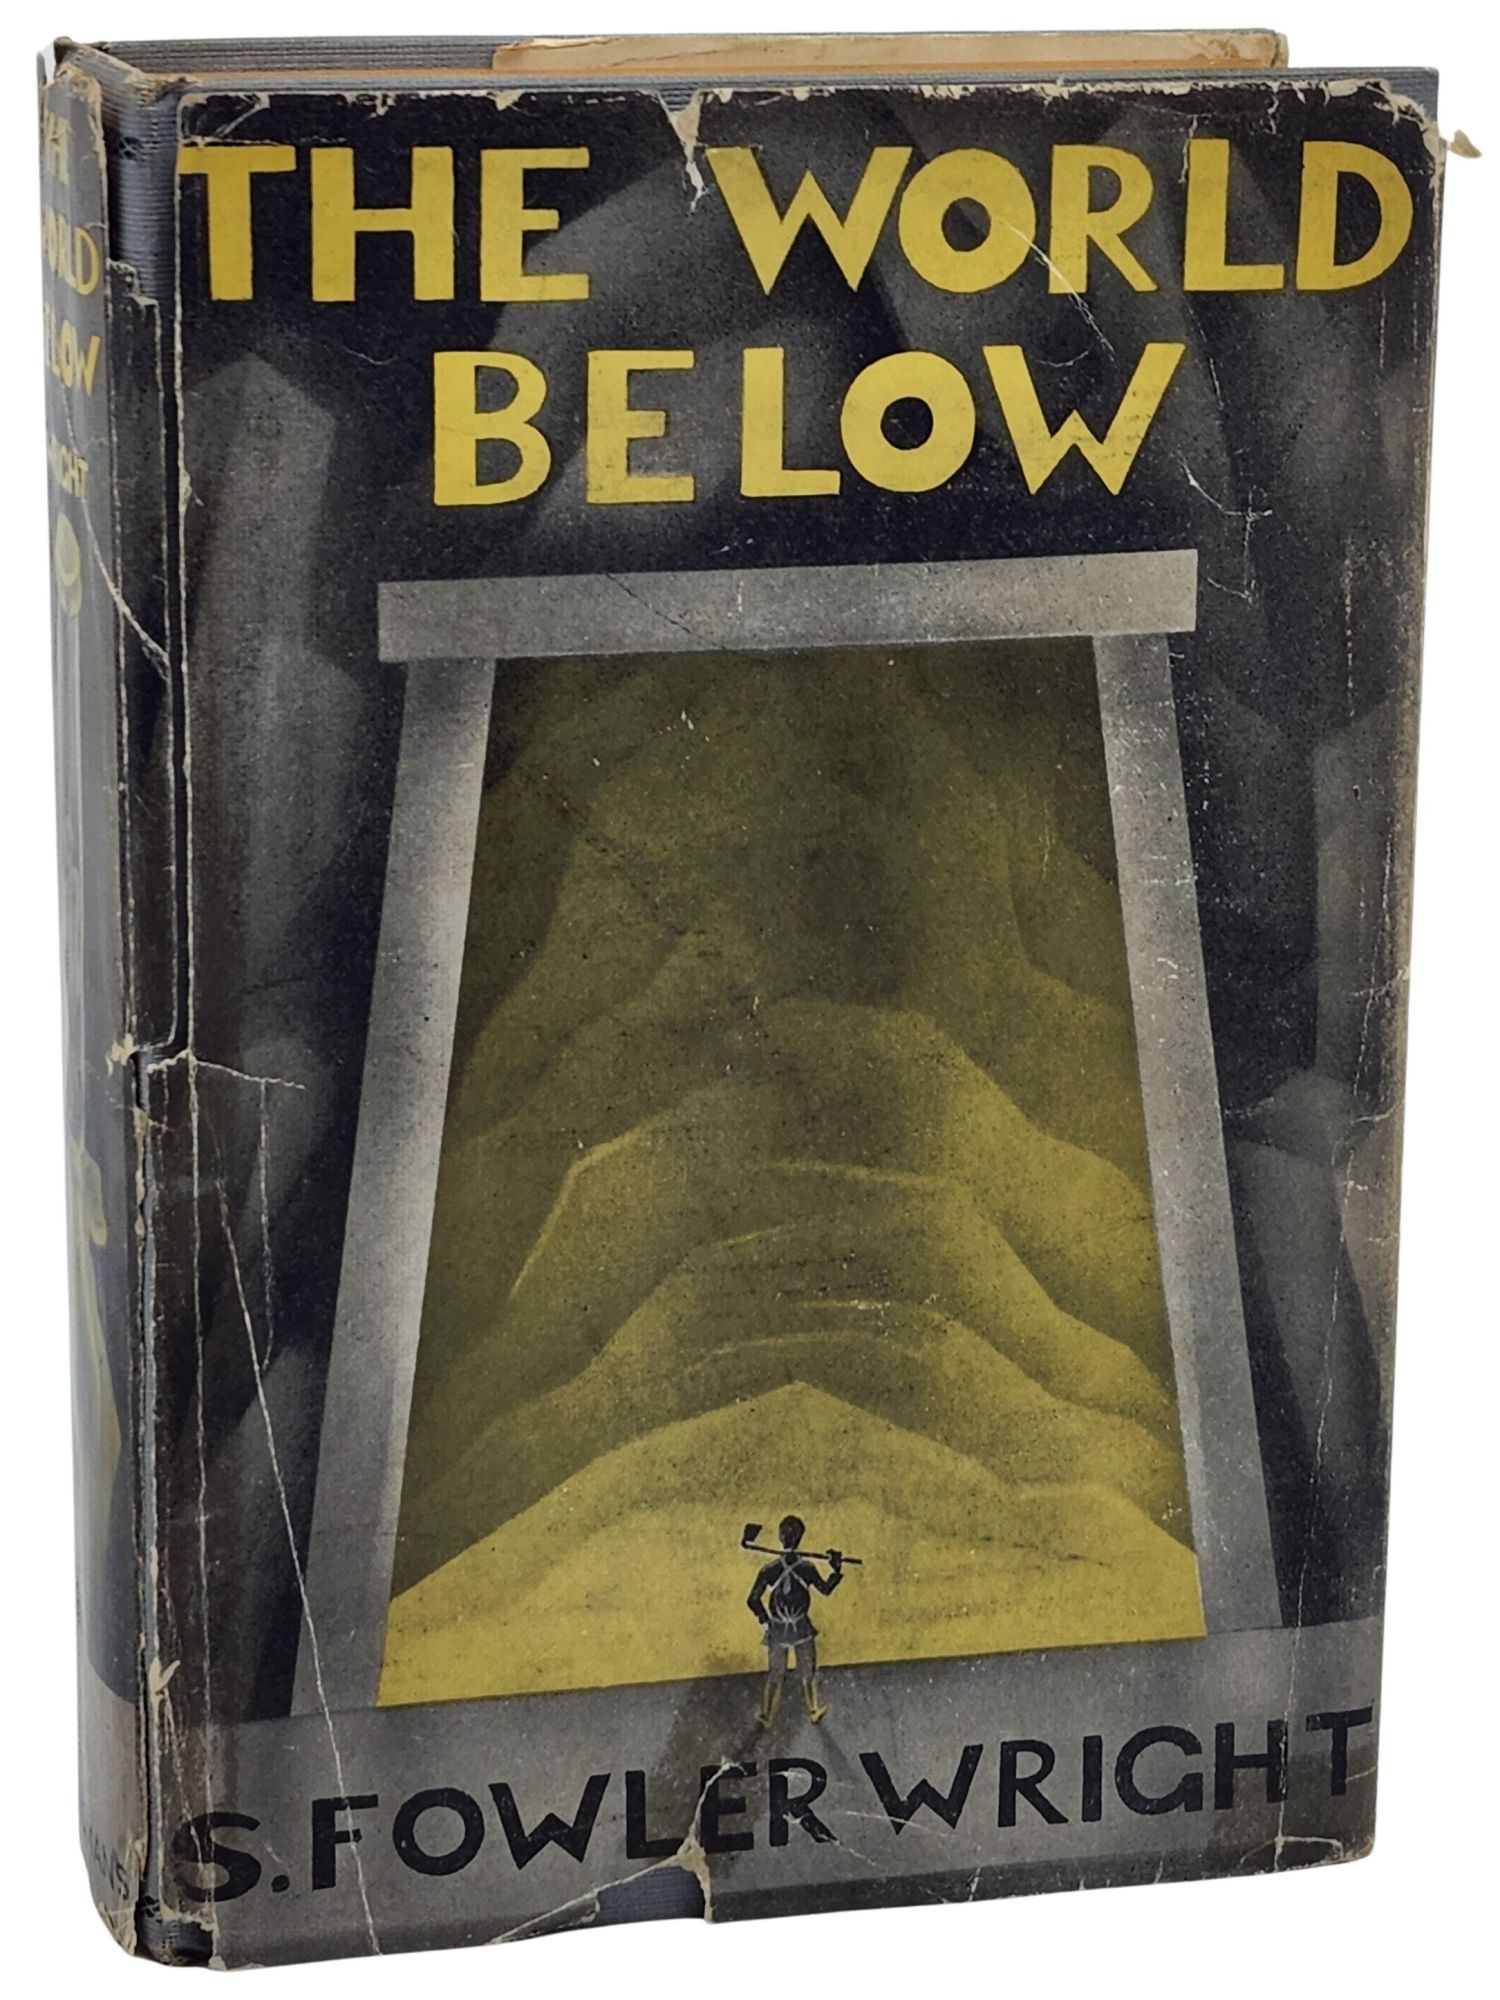 [Book #50779] THE WORLD BELOW. S. Fowler Wright.